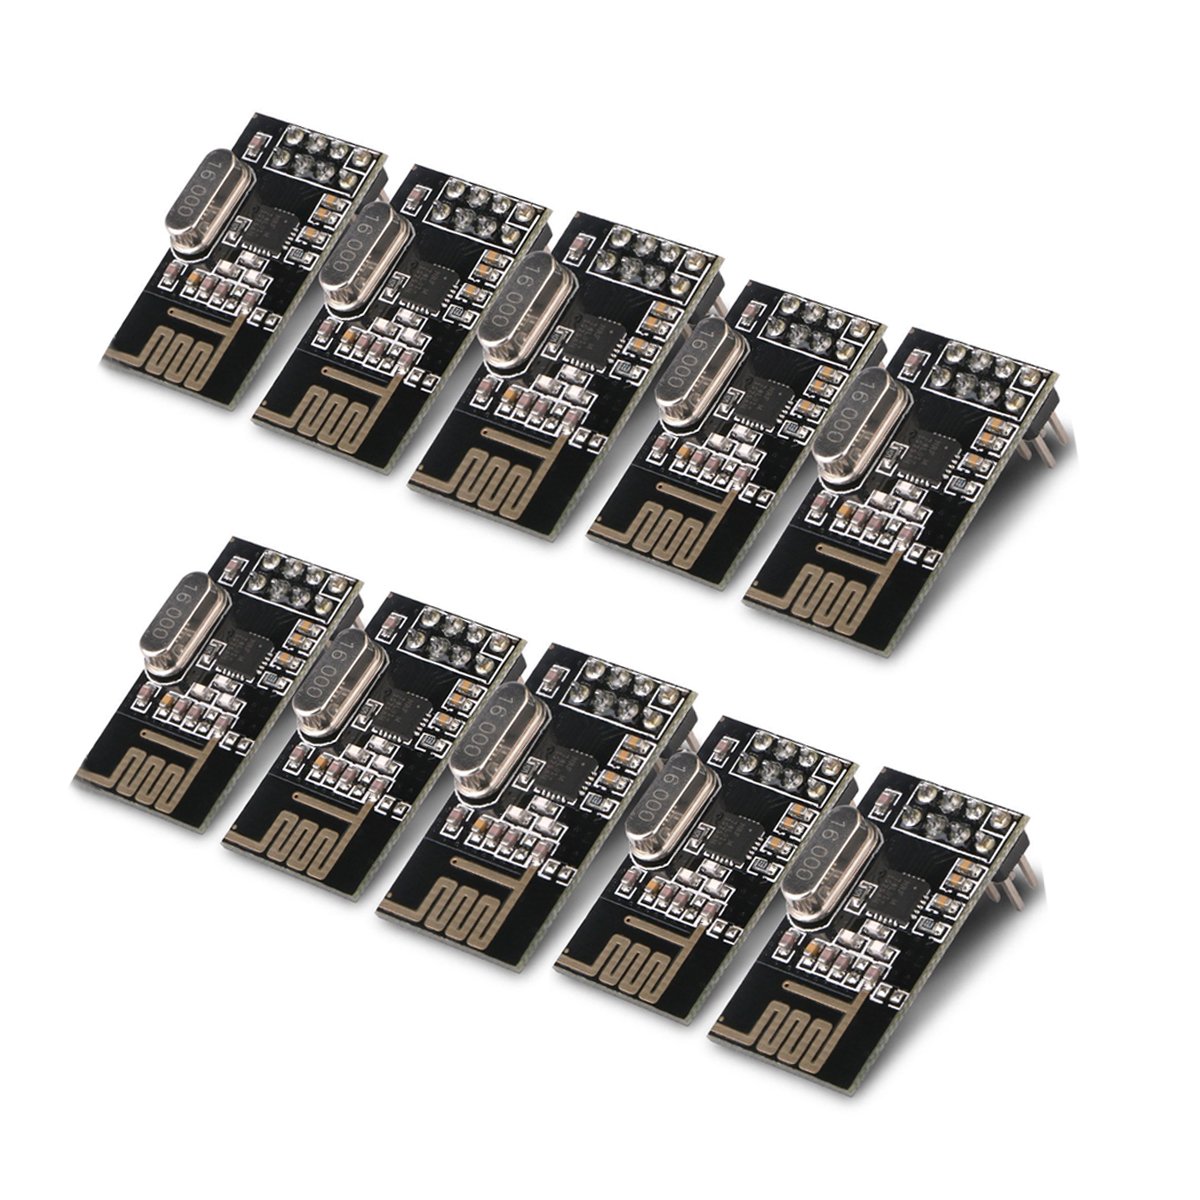 Book Cover MakerFocus 10pcs NRF24L01+ 2.4GHz Wireless RF Transceiver Module Compatible with Ar duino Raspberry Pi